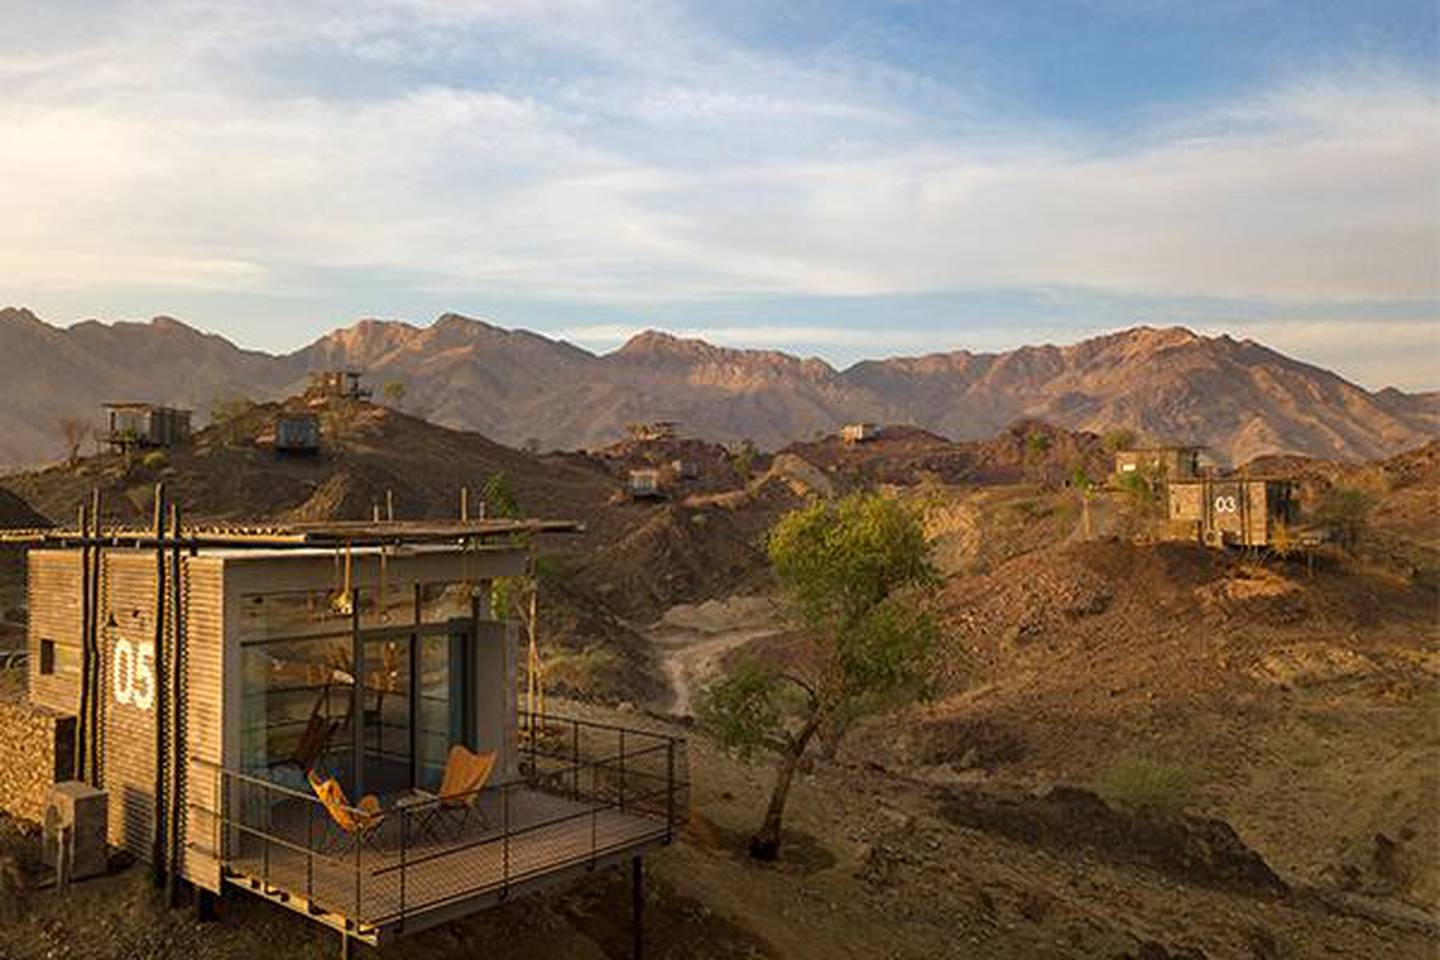 Damani Lodges come with viewing platforms for soaking in the sunset. Courtesy Meraas